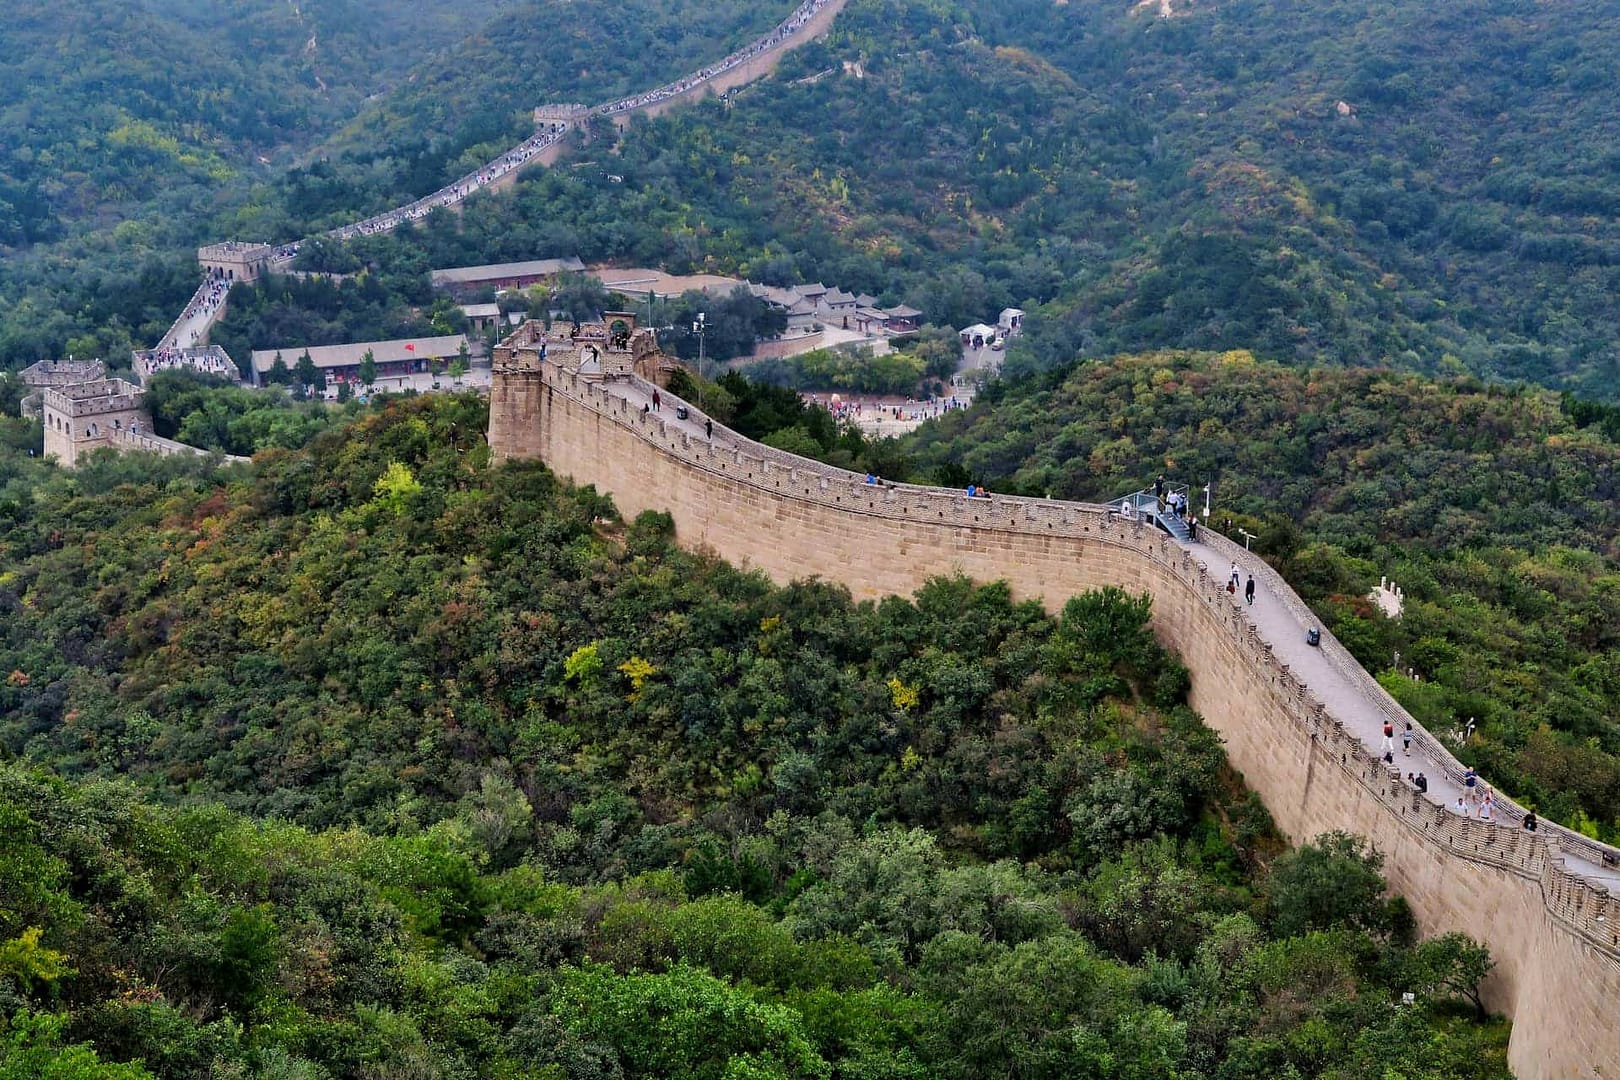 The Great Wall of China protects one of the largest back yards in the world!